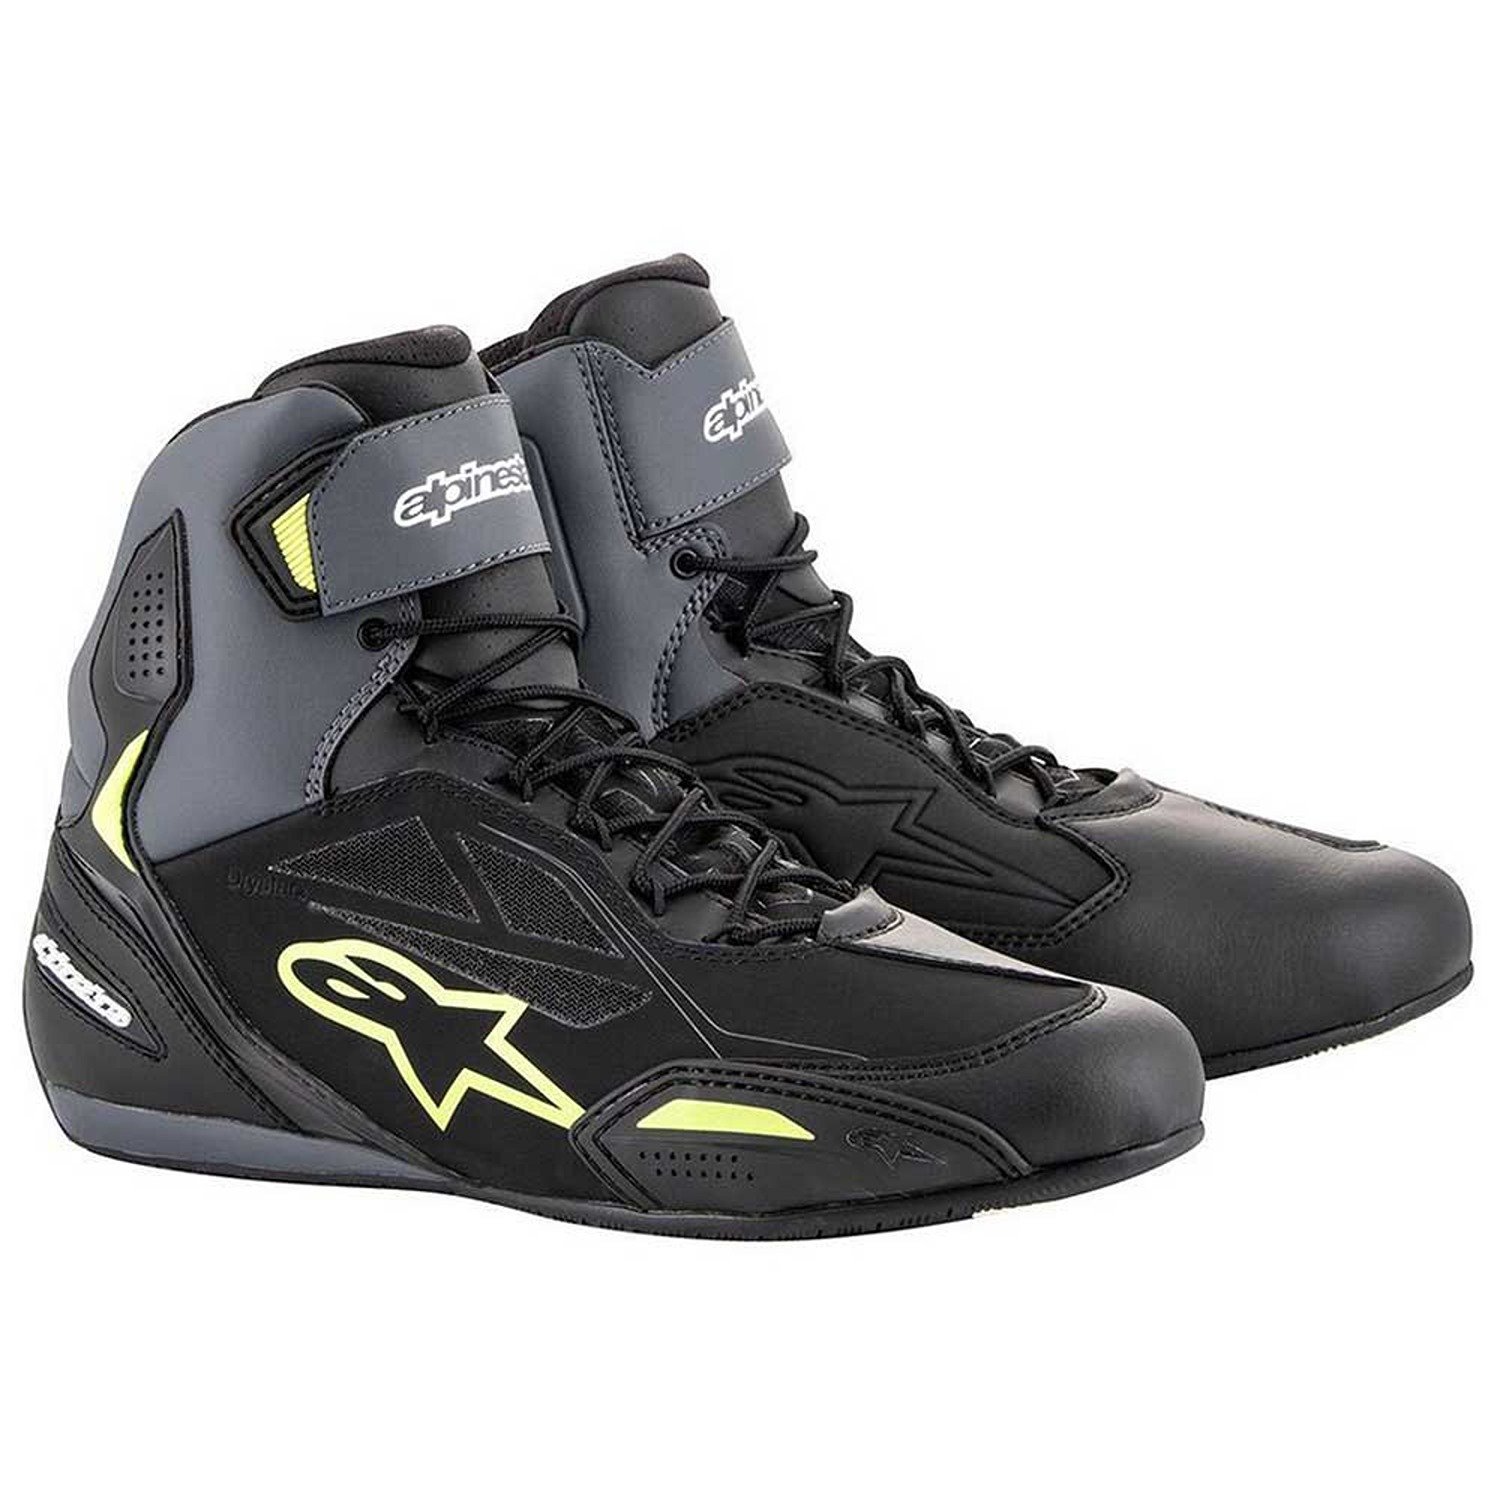 Image of Alpinestars Faster-3 Shoes Black Yellow Fluo Talla US 13